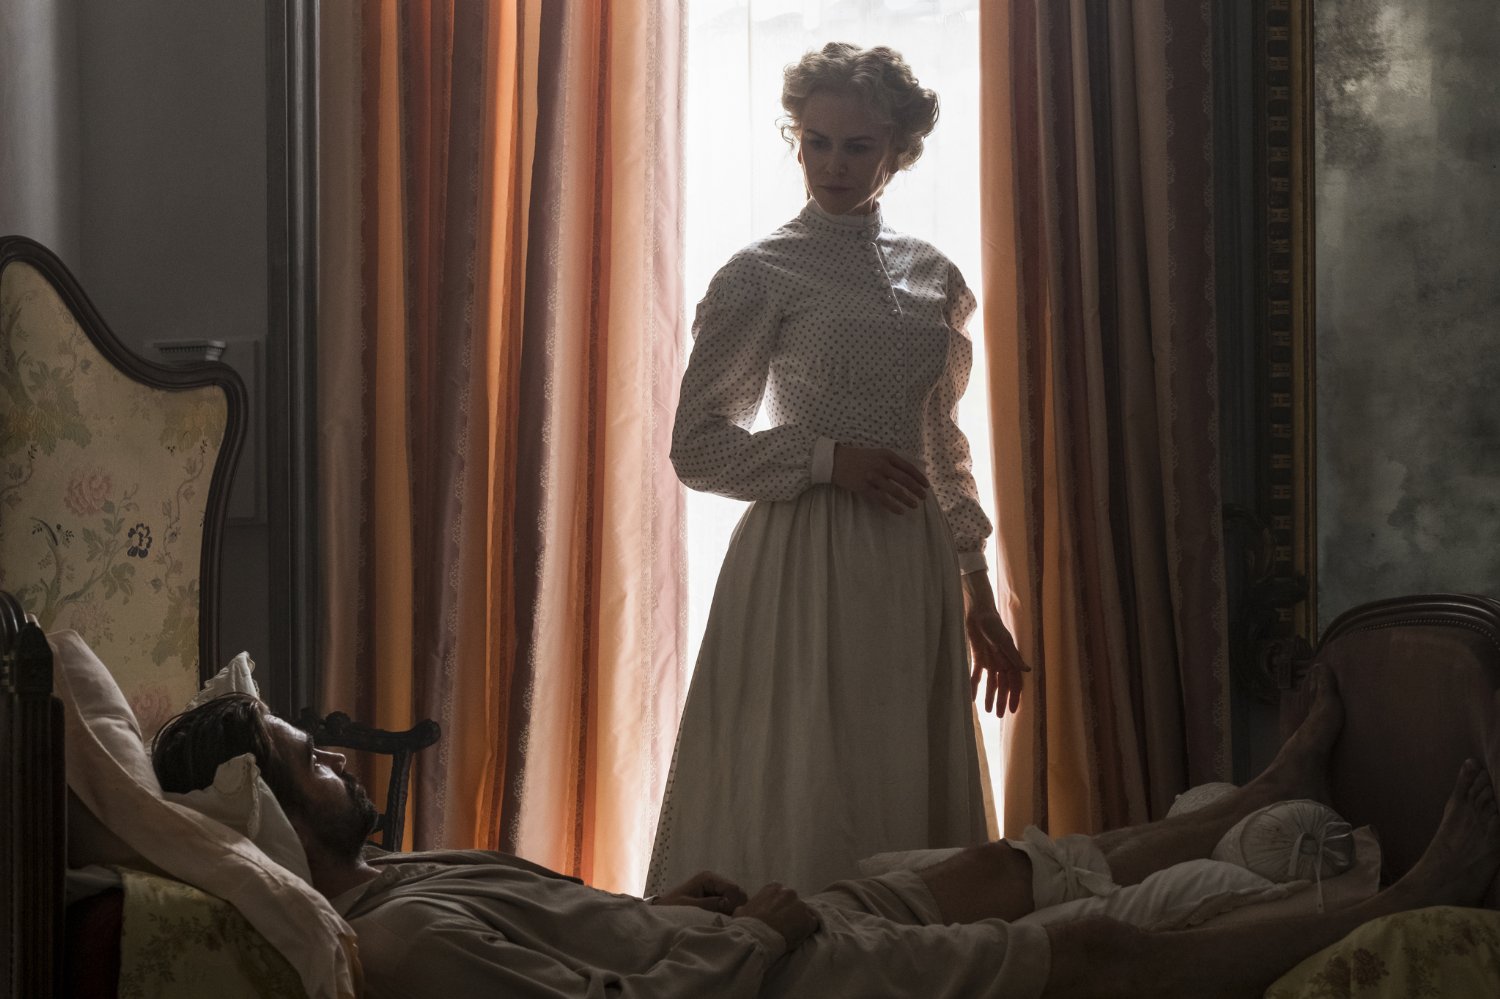 THE BEGUILED 2017 Trailers Clips Featurettes Images And Posters.